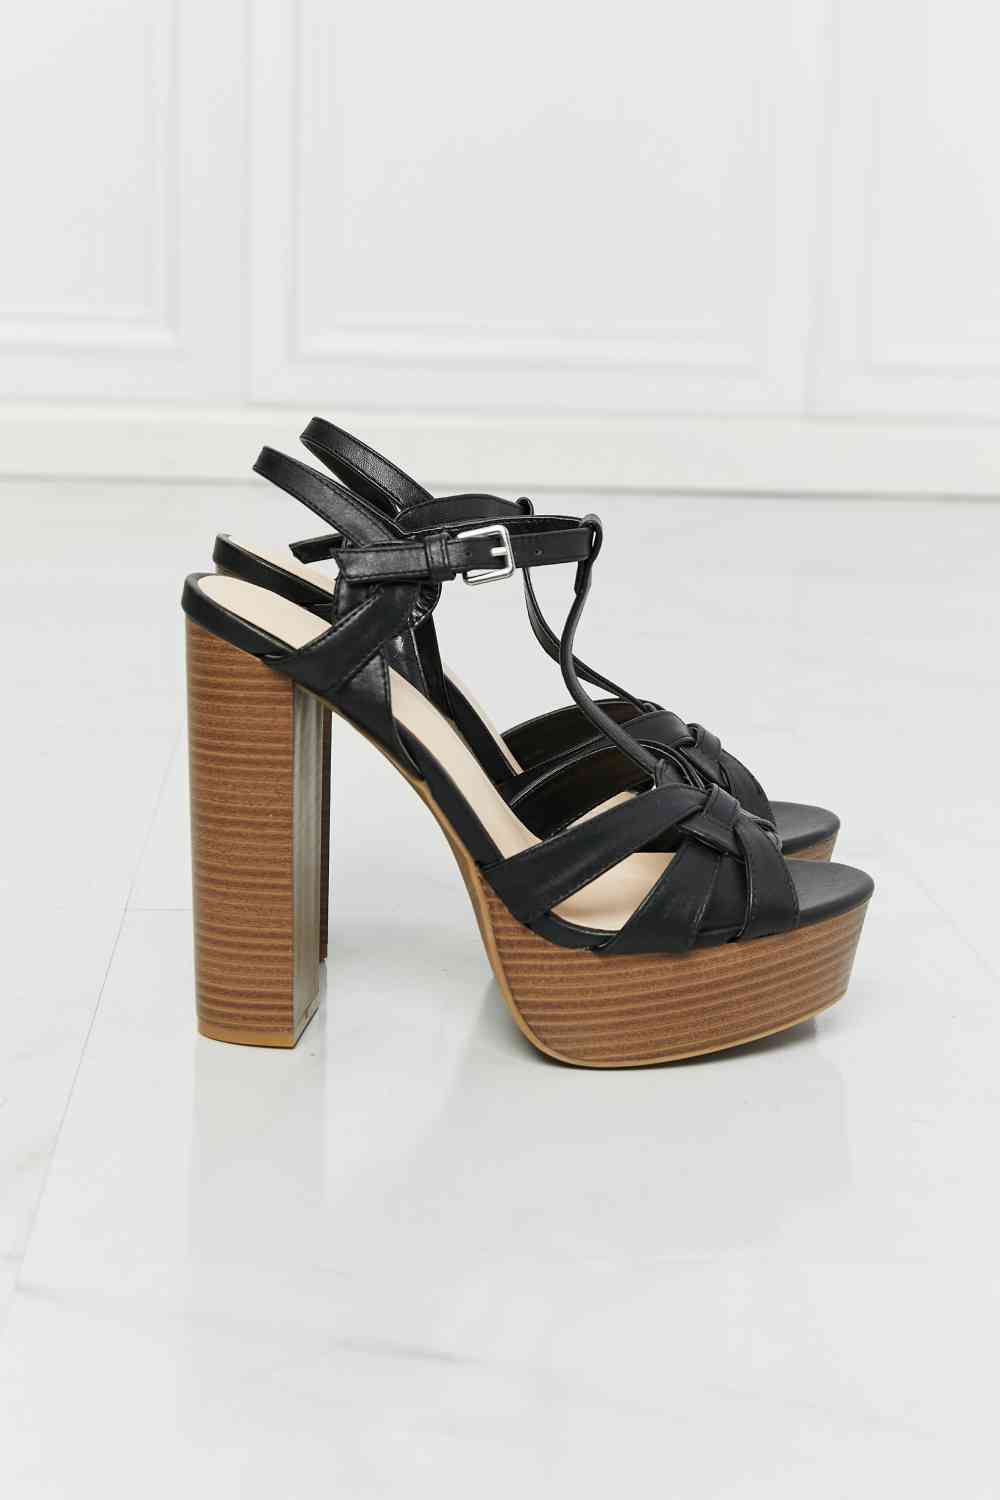 Legend She’s Classy Strappy Heels - Accessories - Shoes - 8 - 2024